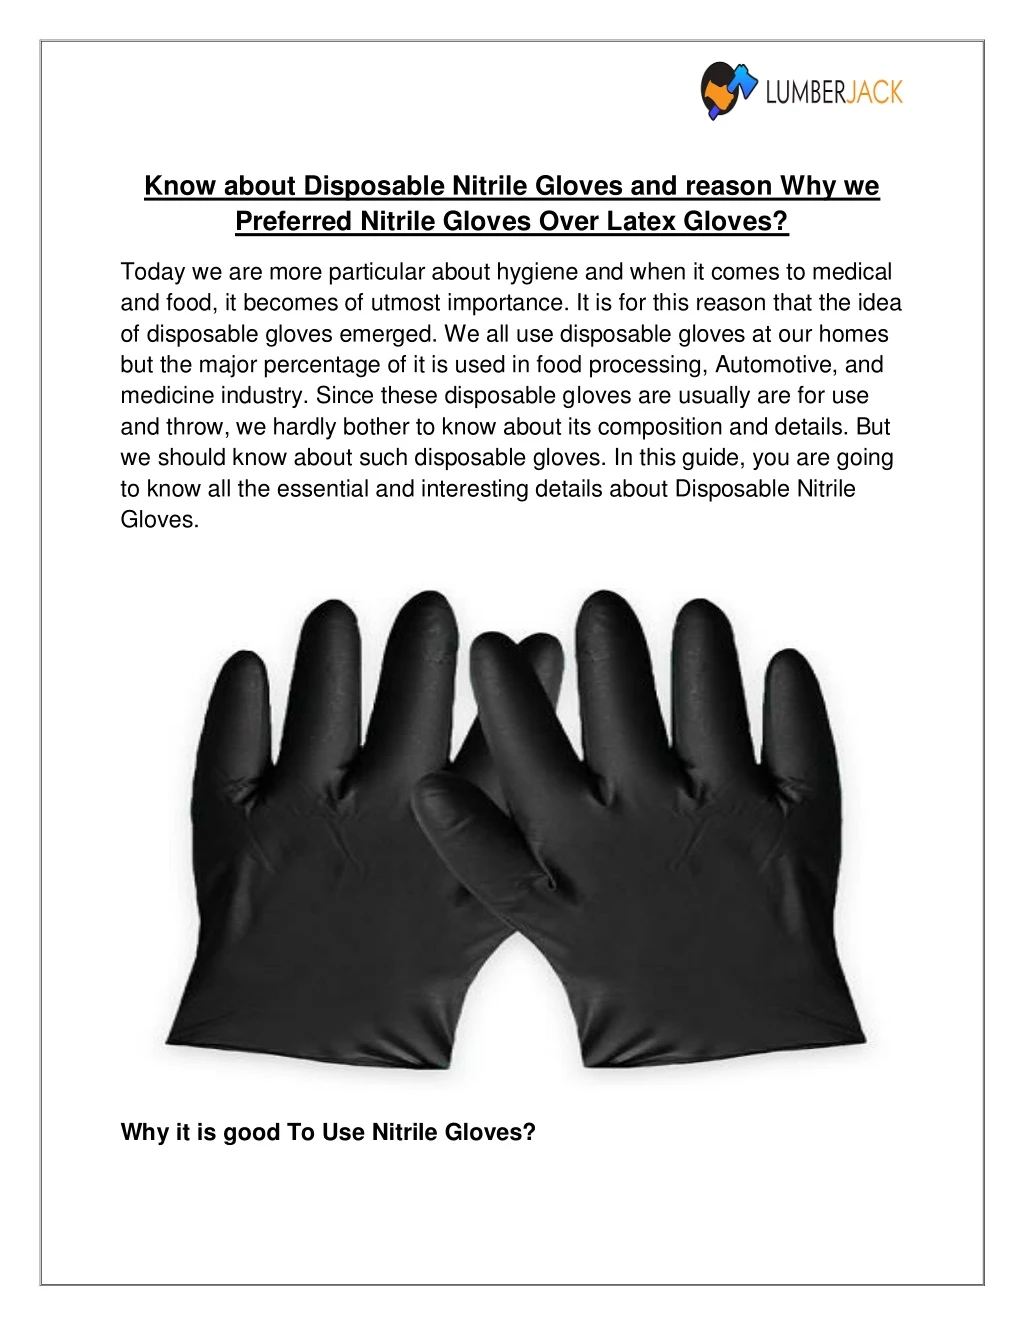 know about disposable nitrile gloves and reason